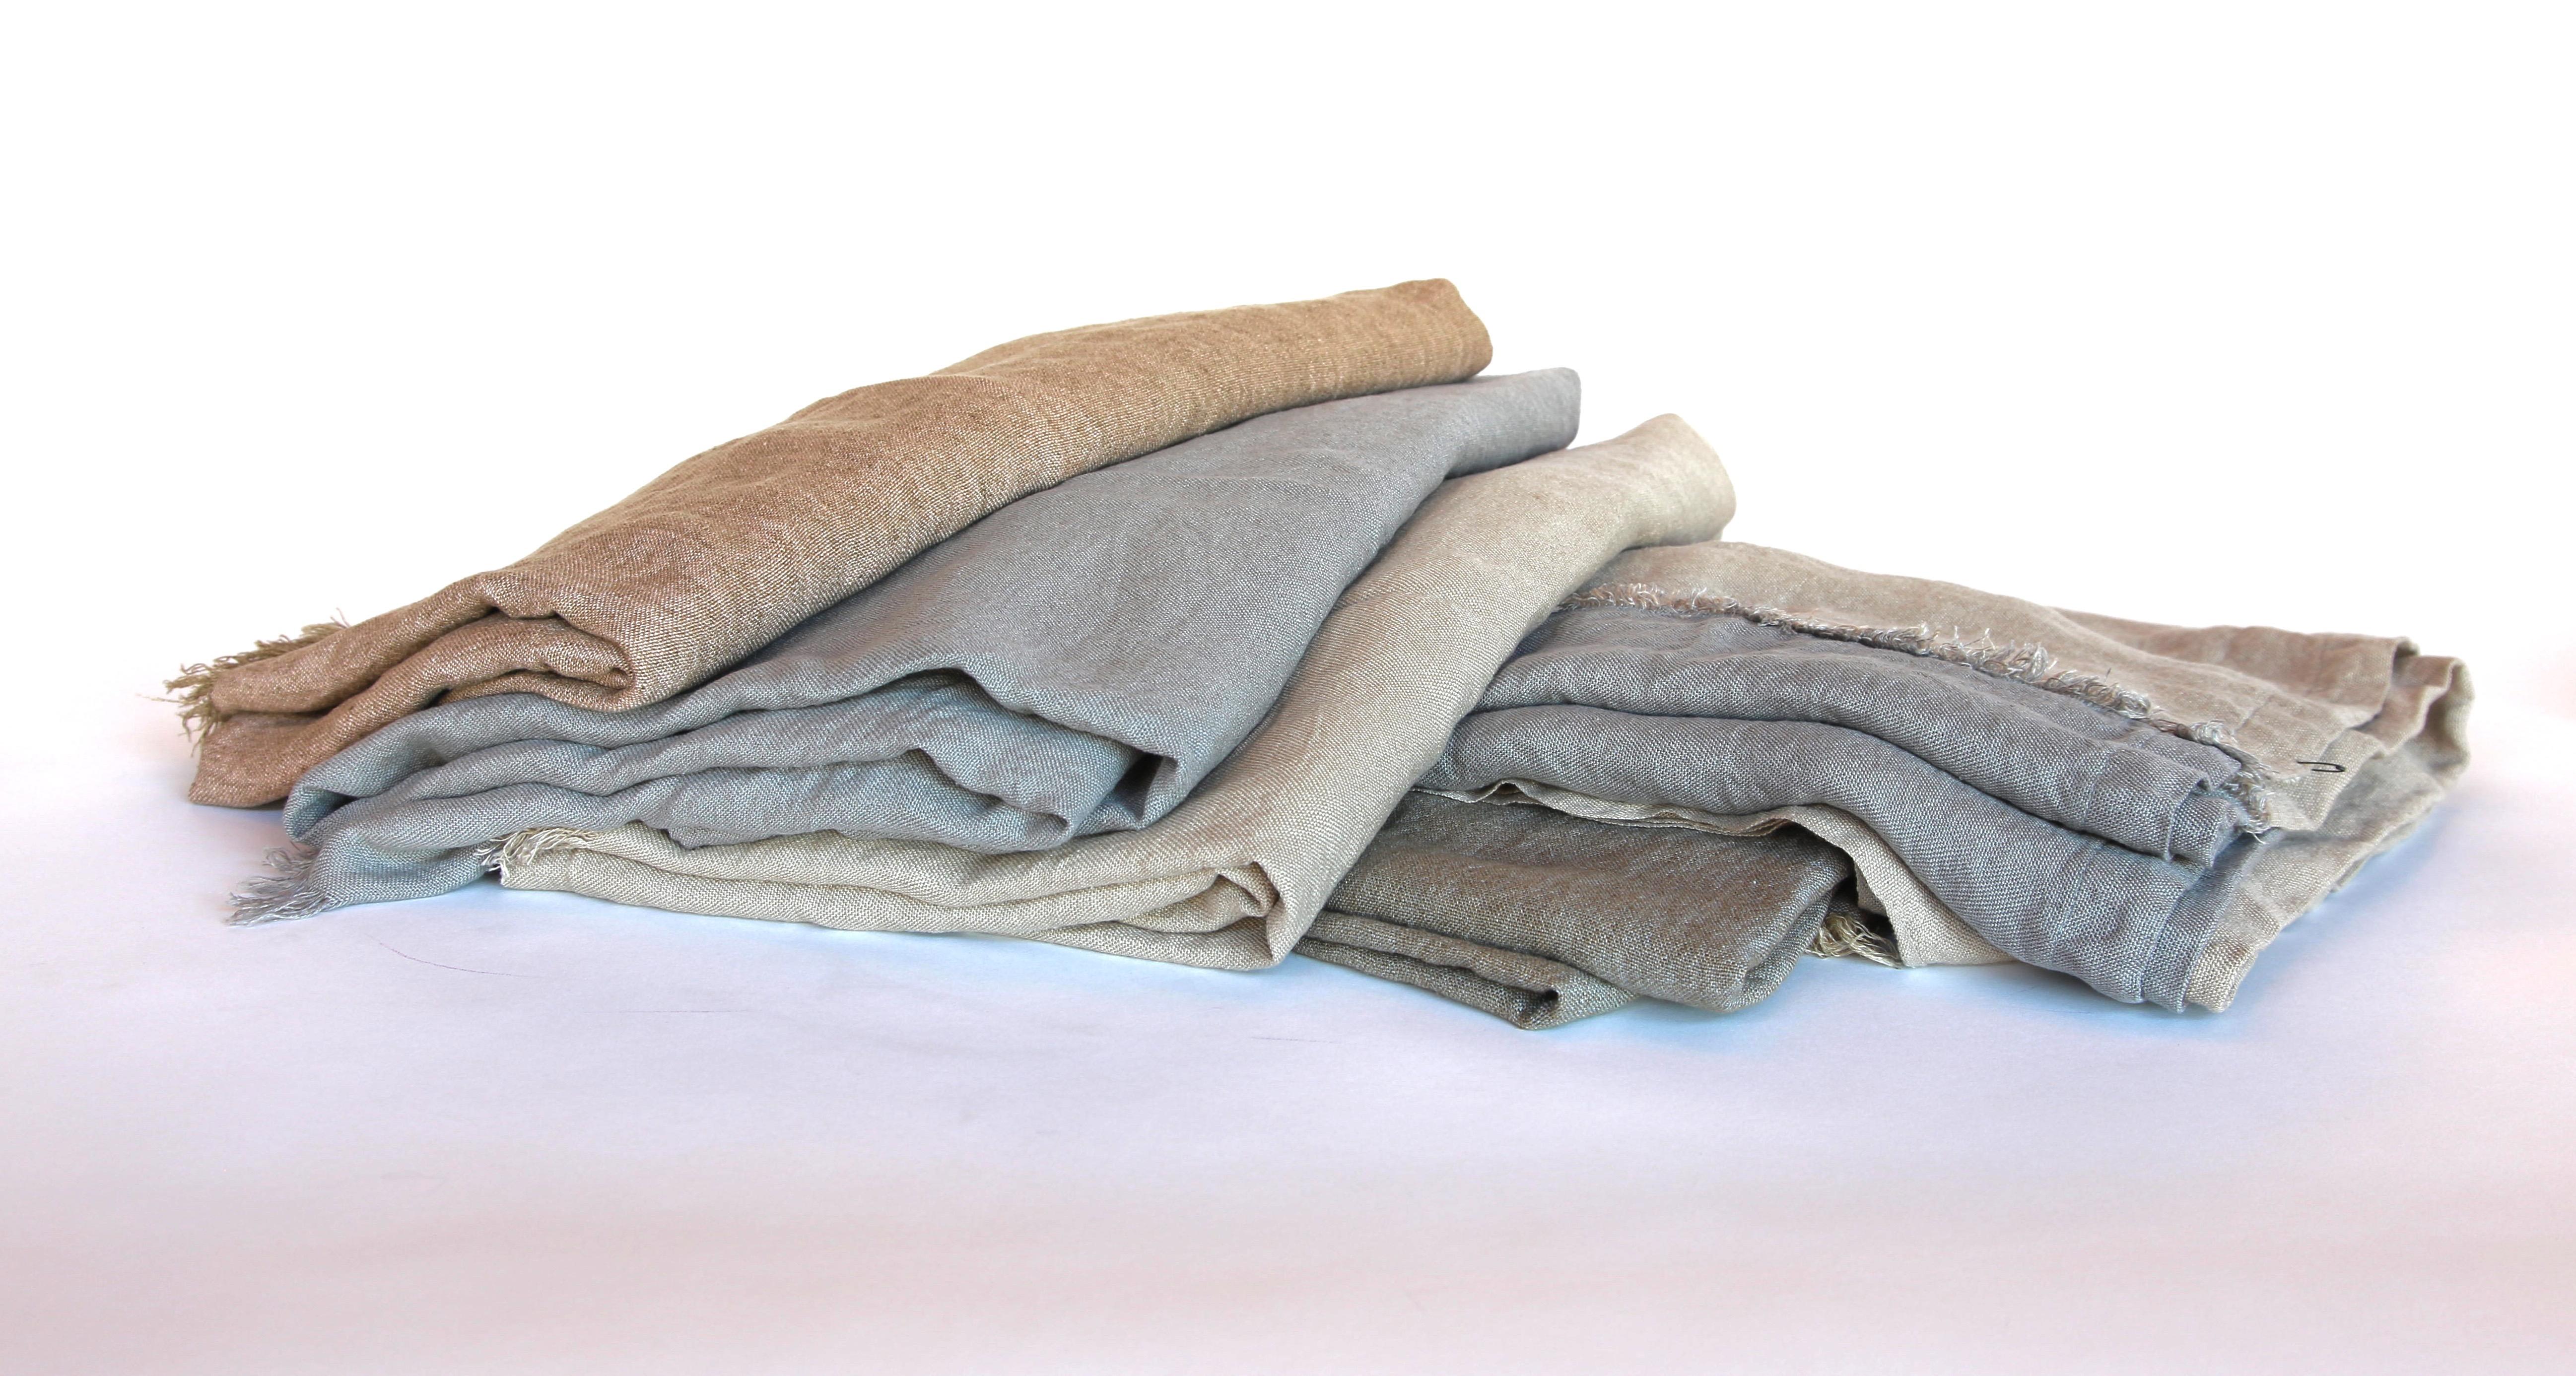 Linen blankets. Sold individually.
Measures: Maxi: 180 x 220 in grey, beige, blue and pink $560.
Polo: 220 x 240 in beige/grey $790.